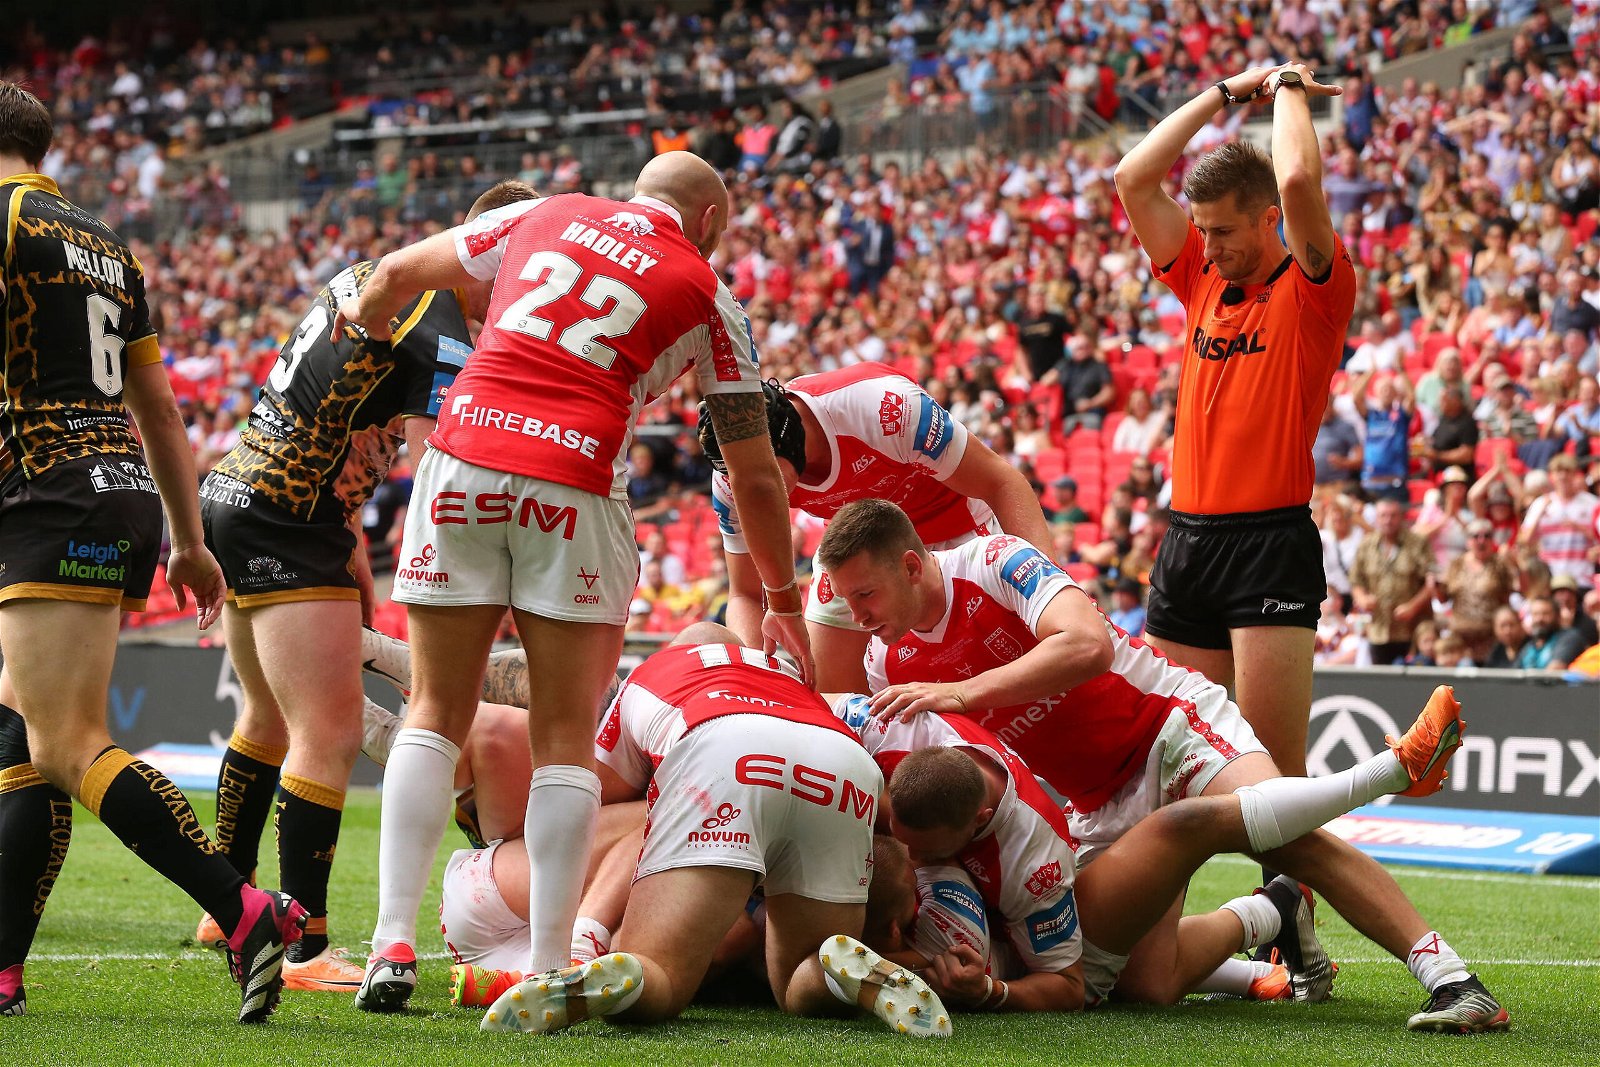 Hull KR players hold a Leigh Leopards player up after he crosses the line during the Challenge Cup Final at Wembley Stadium. 